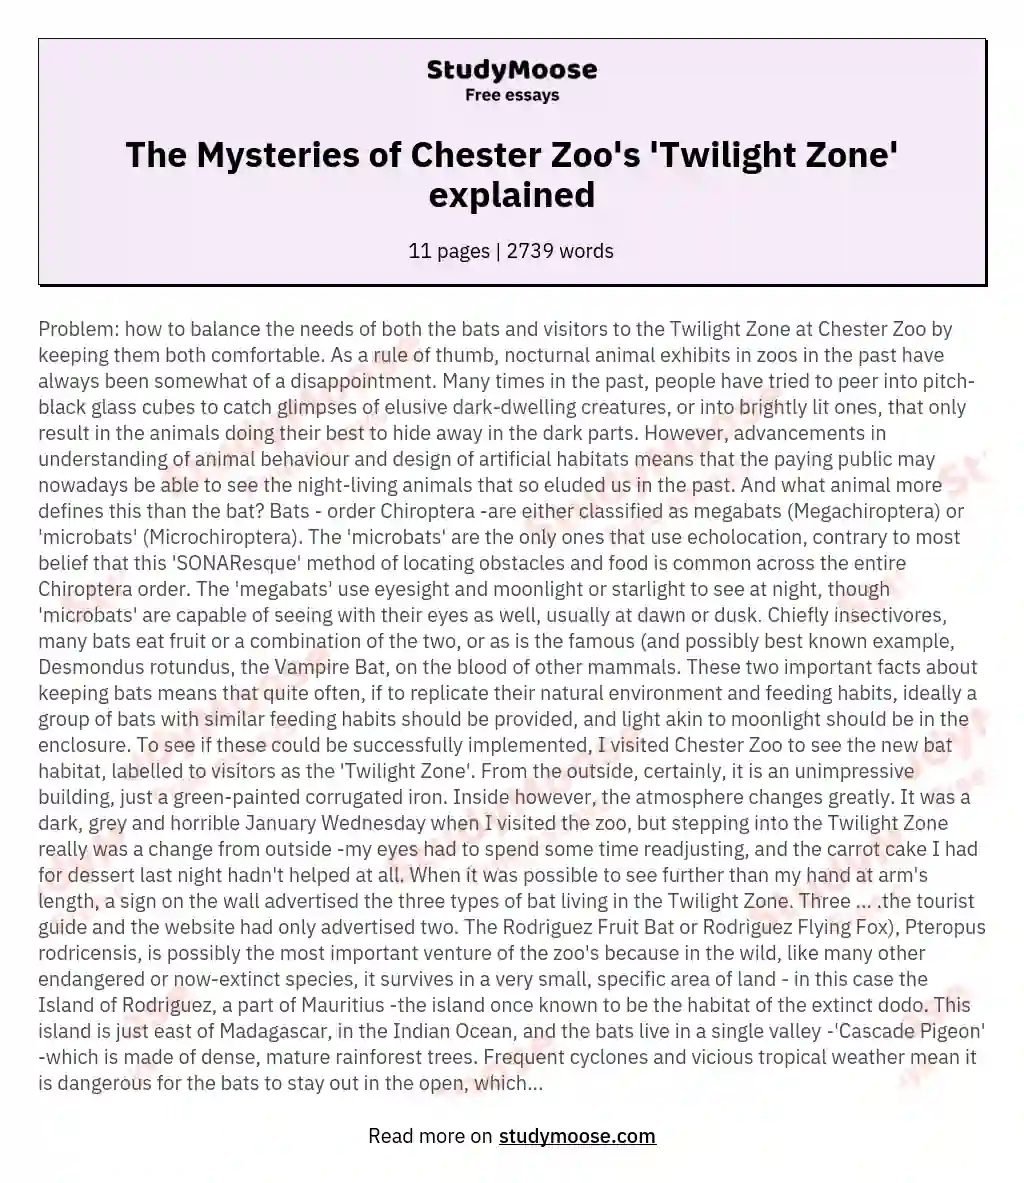 The Mysteries of Chester Zoo's 'Twilight Zone' explained essay